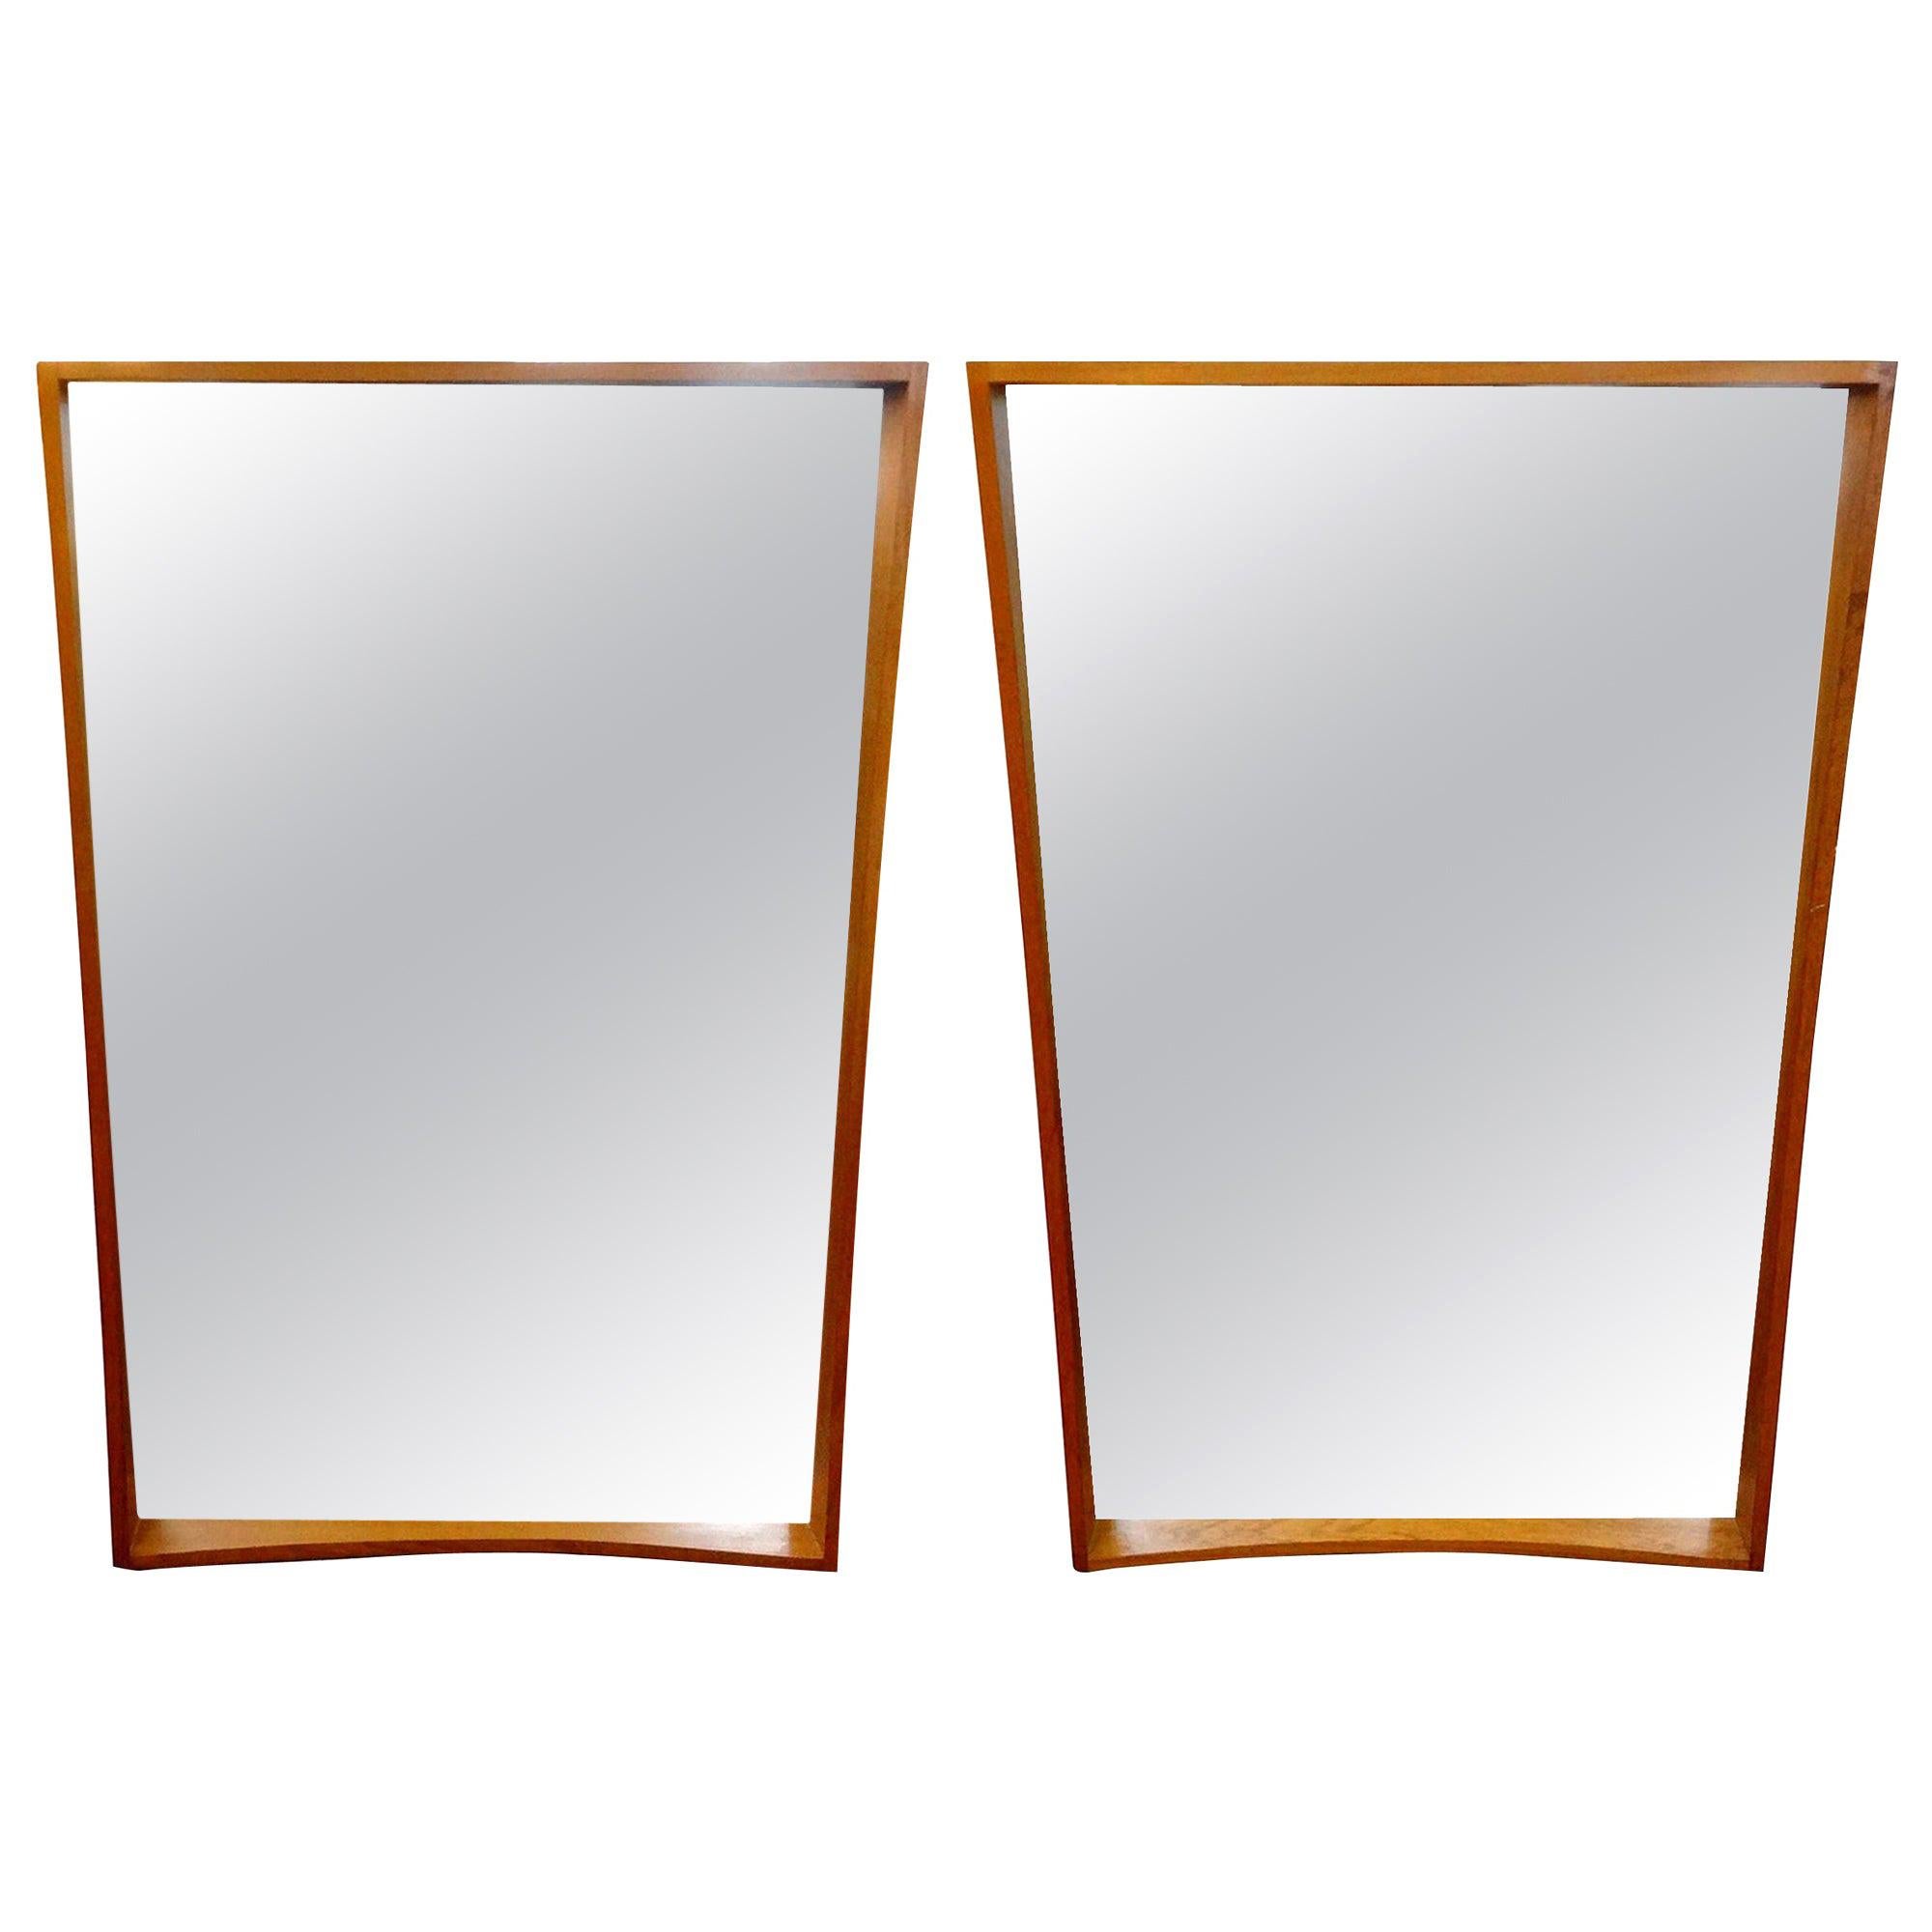 Stunning matching pair of Scandinavian Modern teak mirrors by Pedersen & Hansen, Denmark. These great Mid-Century Modern Pedersen & Hansen mirrors have a three dimensional effect and show beautiful dovetailing at each corner. Both mirrors in great